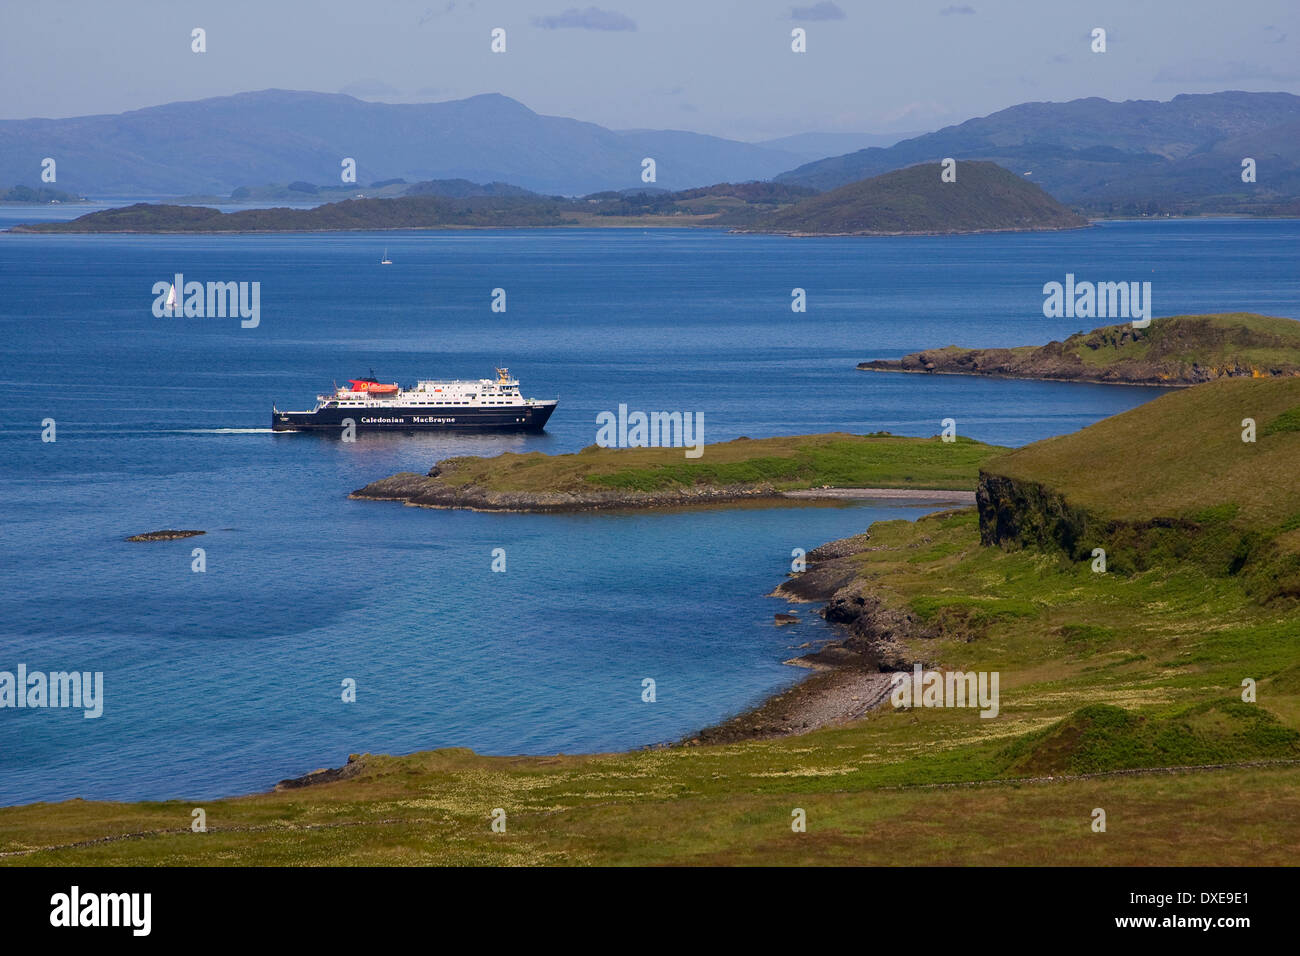 M.V.Clansman is seen here approaching Oban Bay with lismore and the morvern hills in view, Argyll Stock Photo